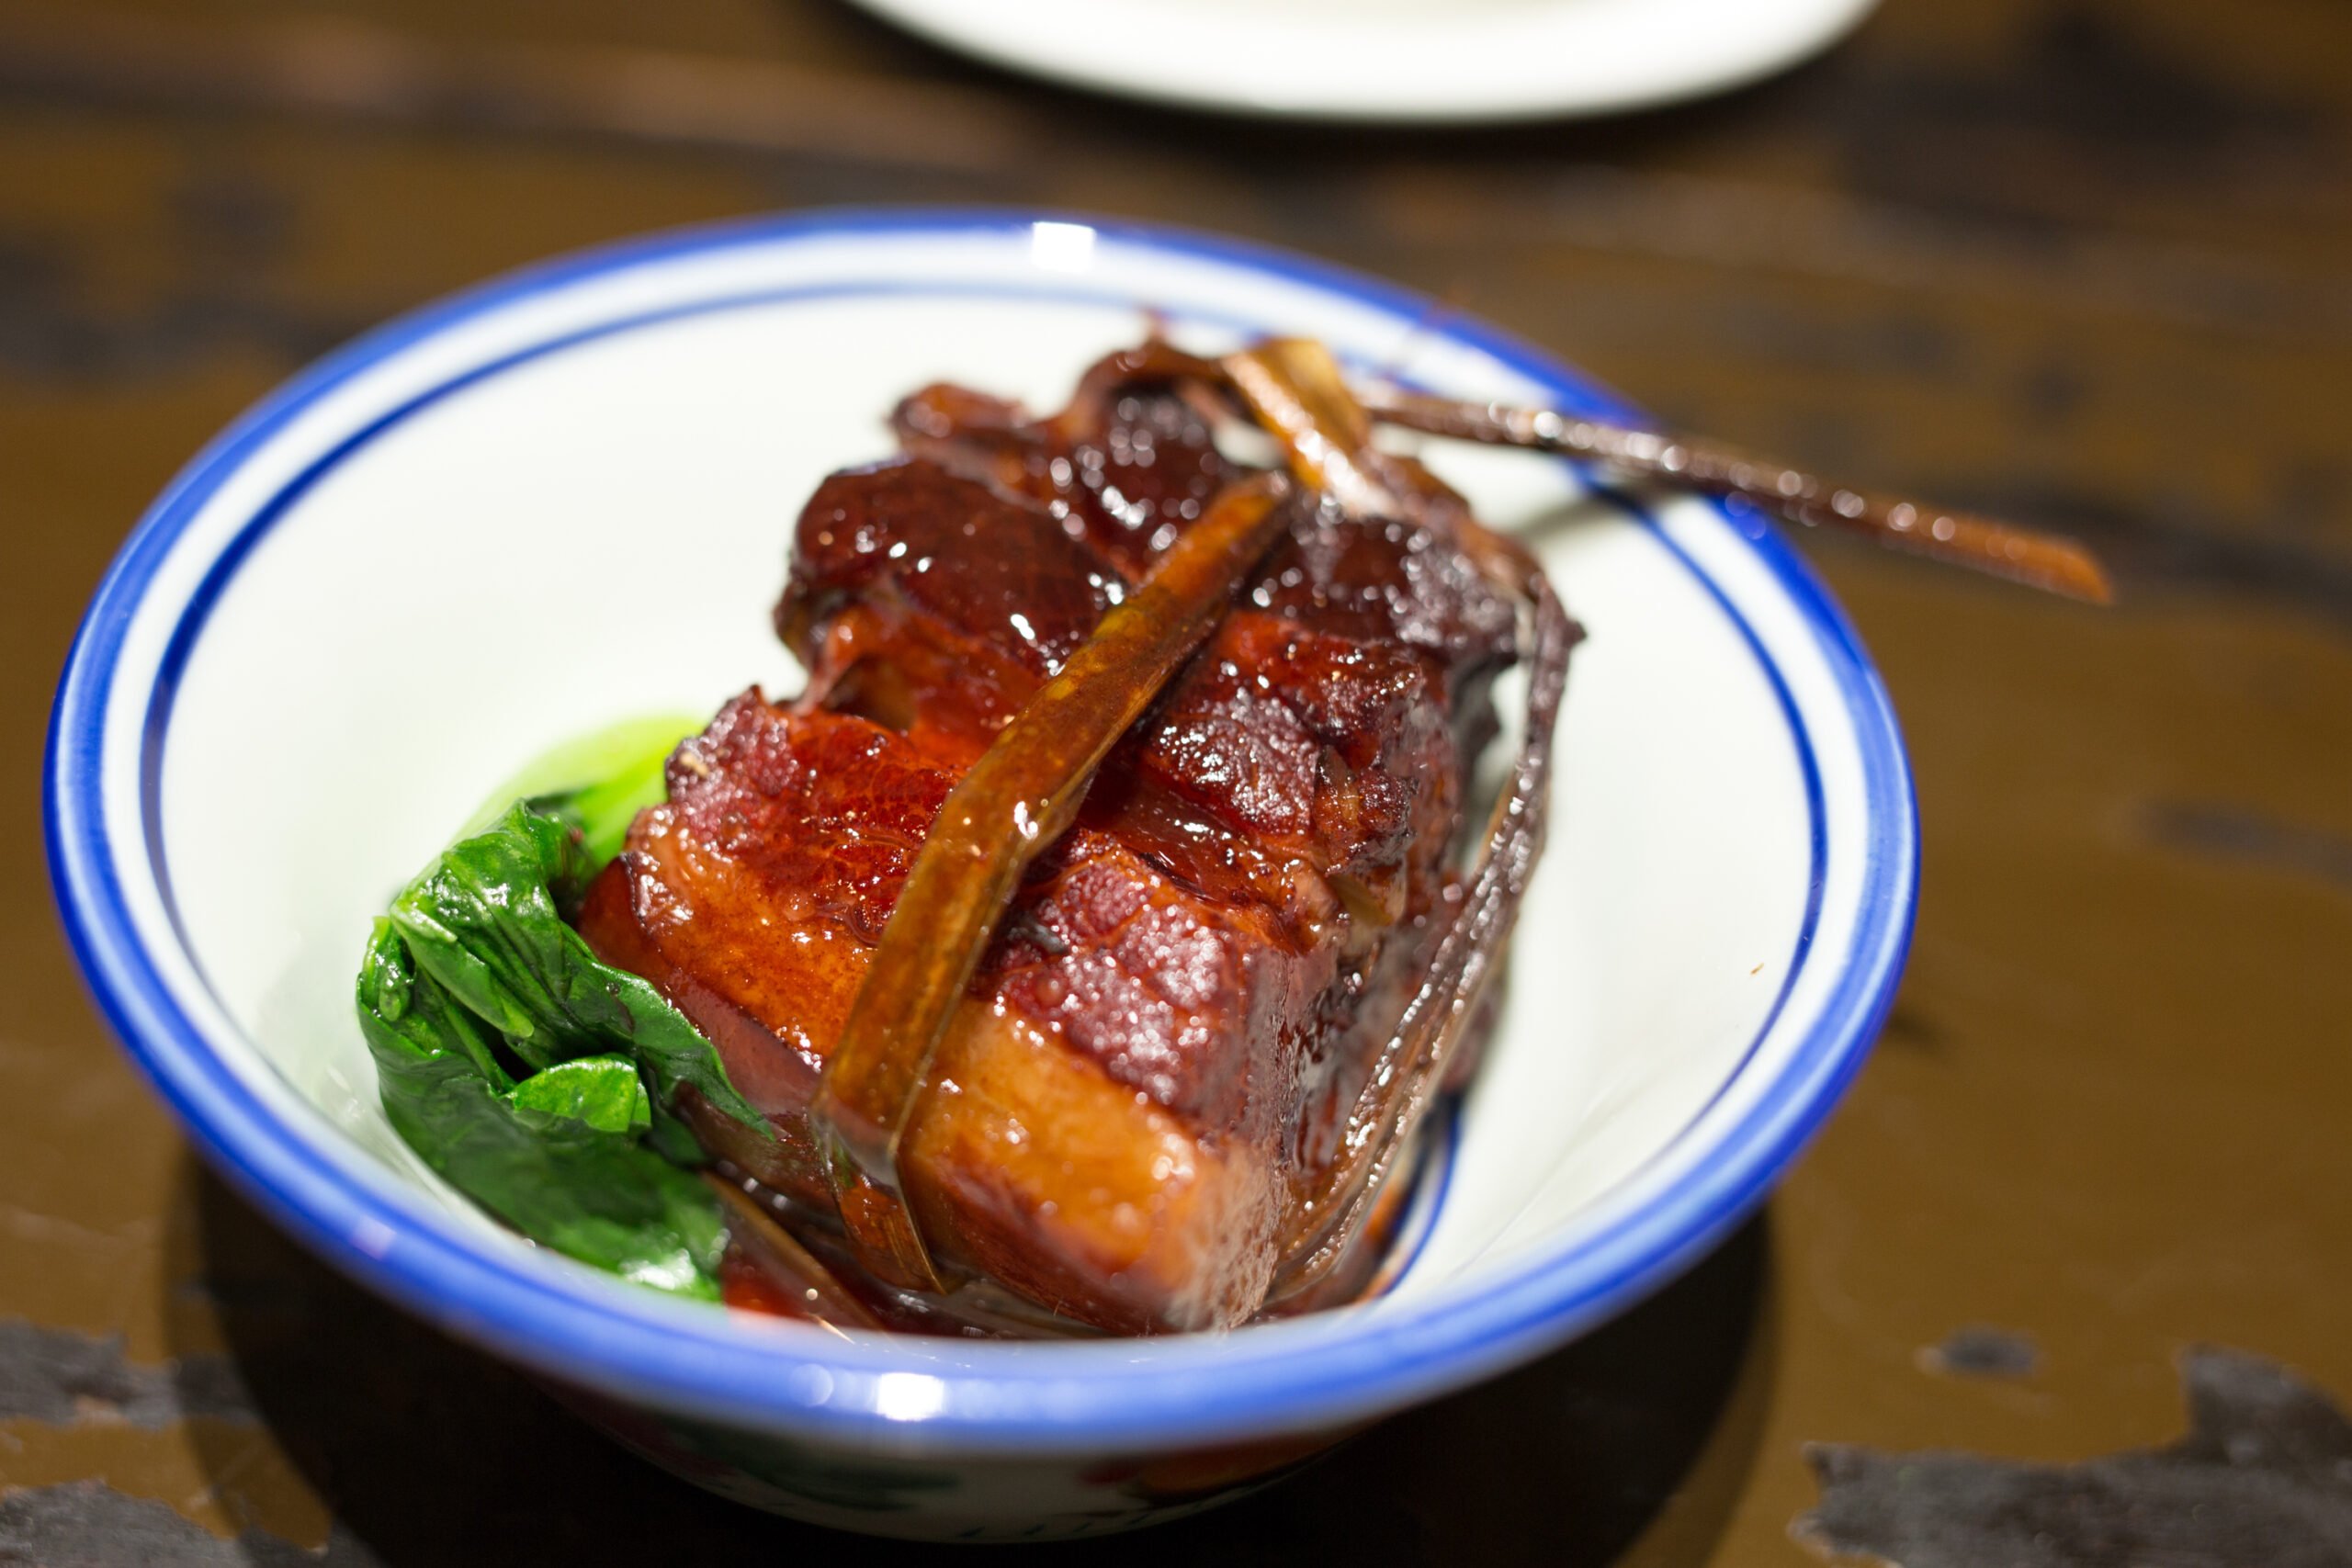 Find Out Why Pork Belly Is Best In China At A Farm To Table Restaurant Supporting Minority Groups During Our Shanghai Evening Food Tour